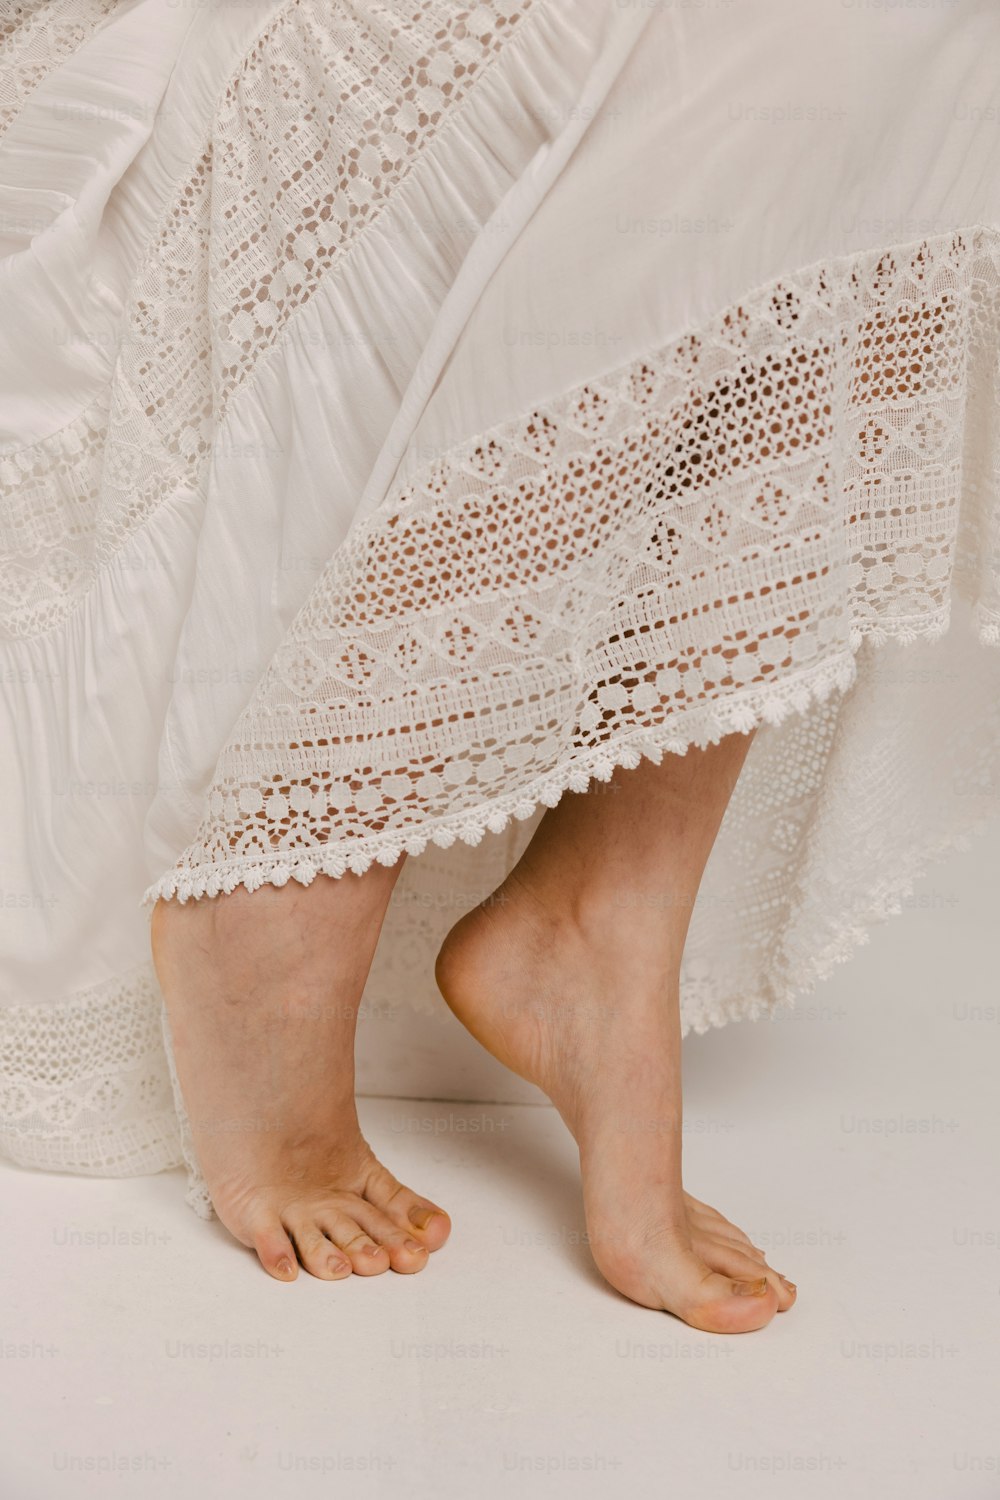 a woman's bare feet in a white dress